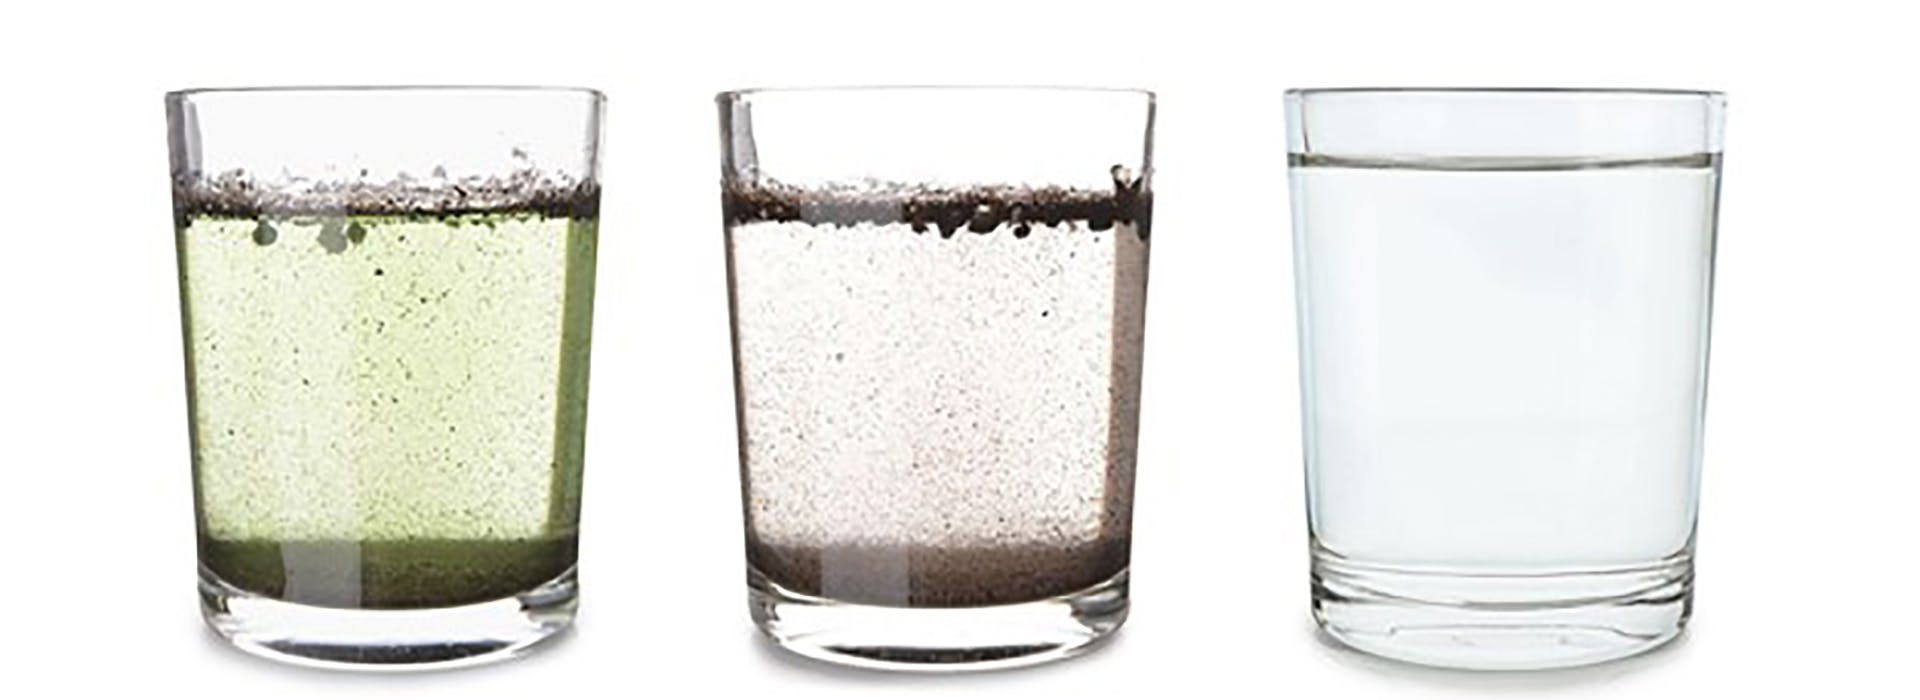 Unfiltered Tap Water Image Comparison in Glasses